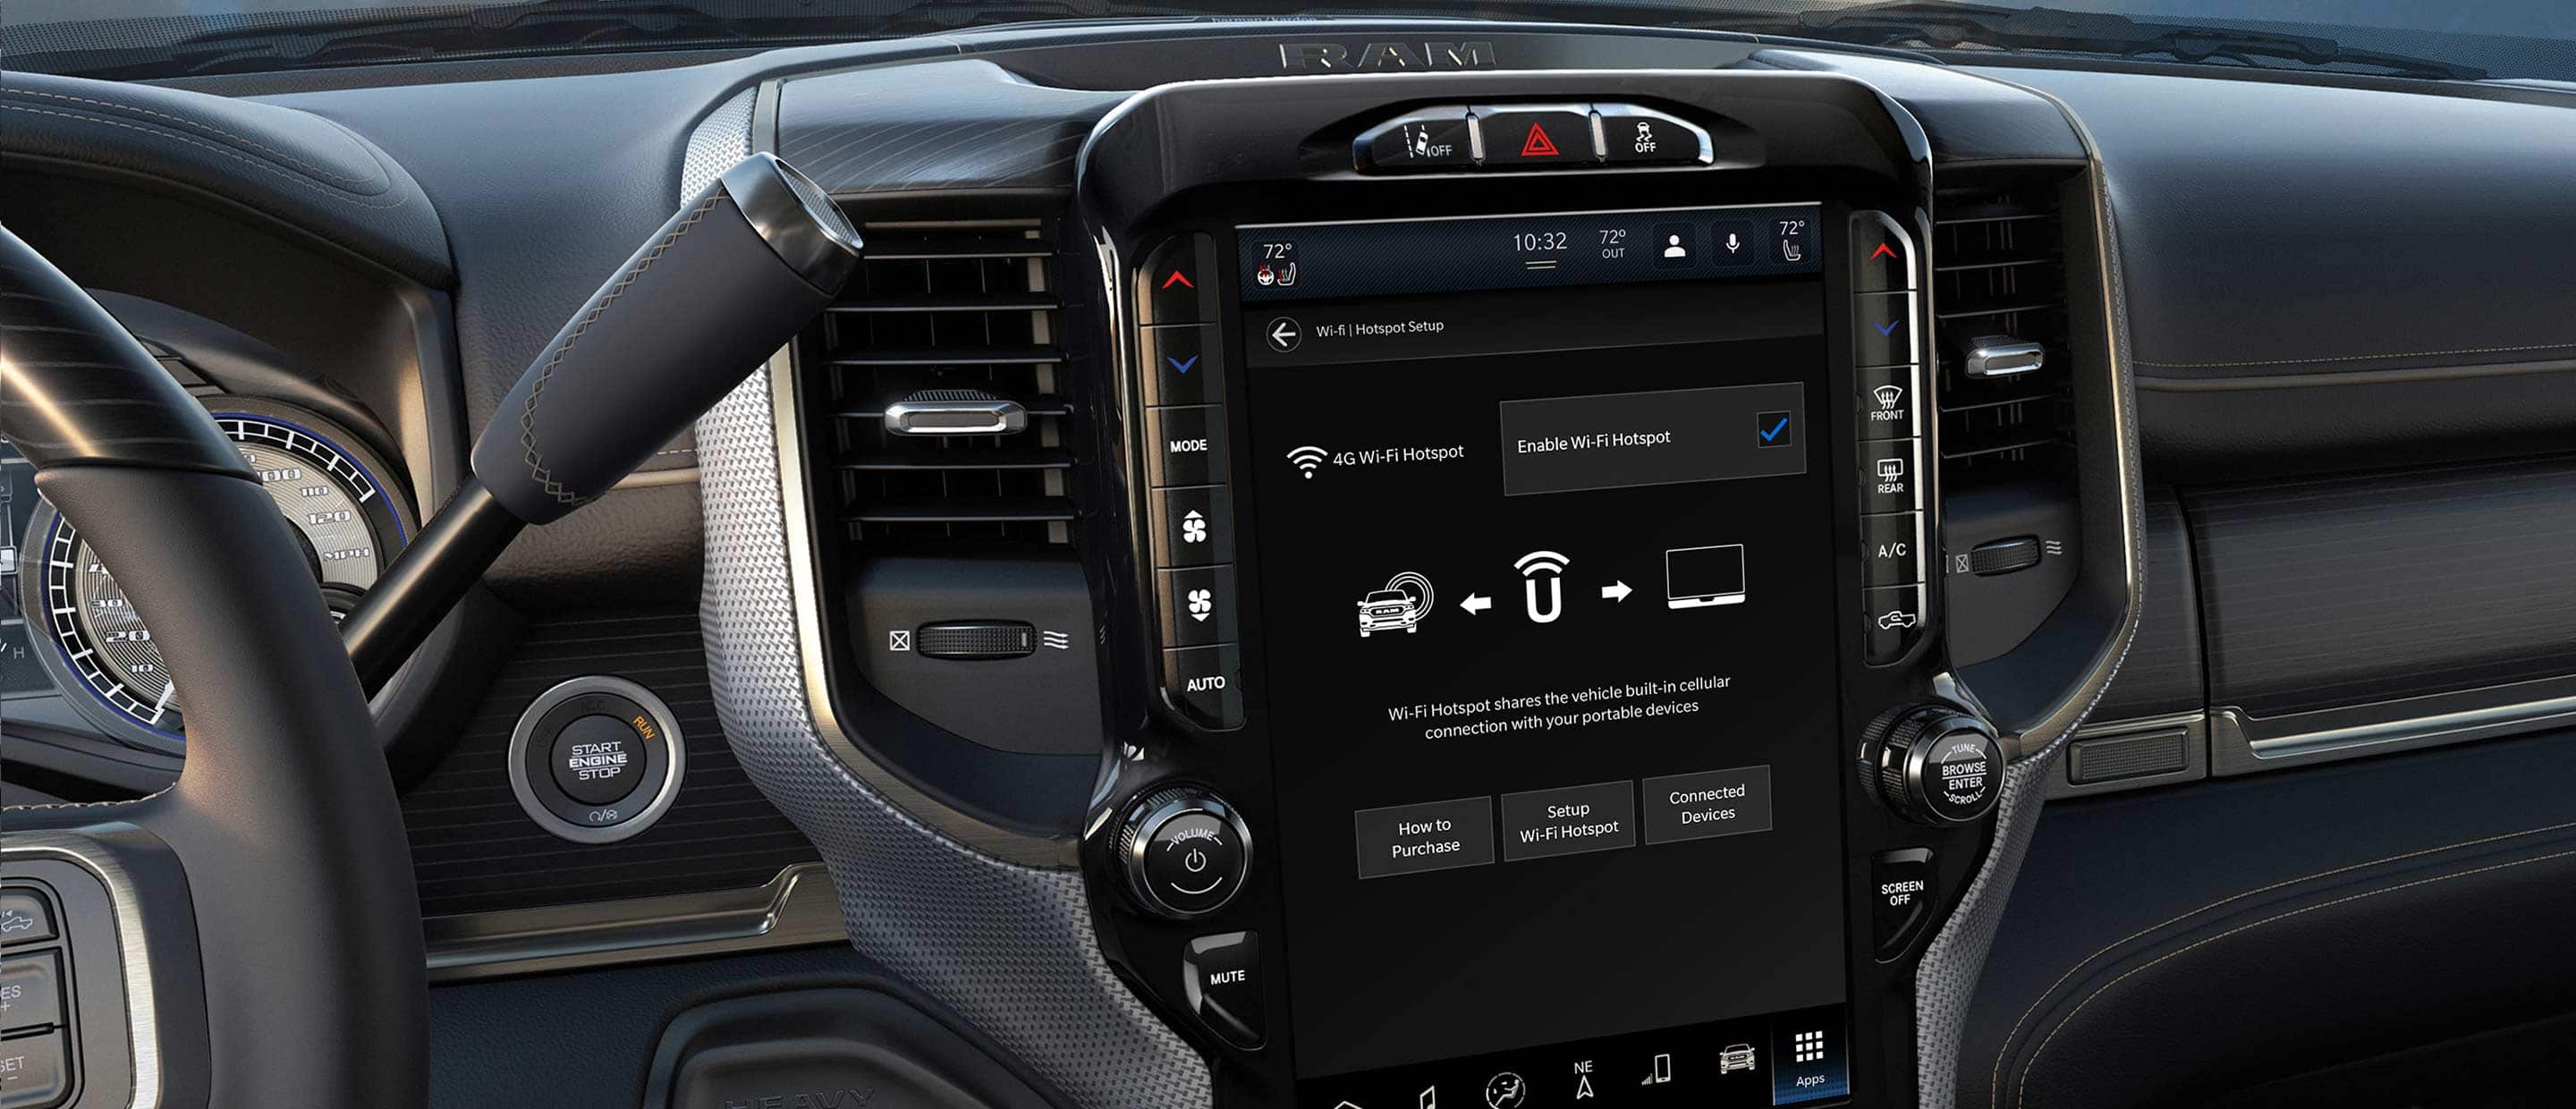 The touchscreen in the 2022 Ram 3500 displaying instructions for connecting portable devices to the vehicle's wi-fi connection.